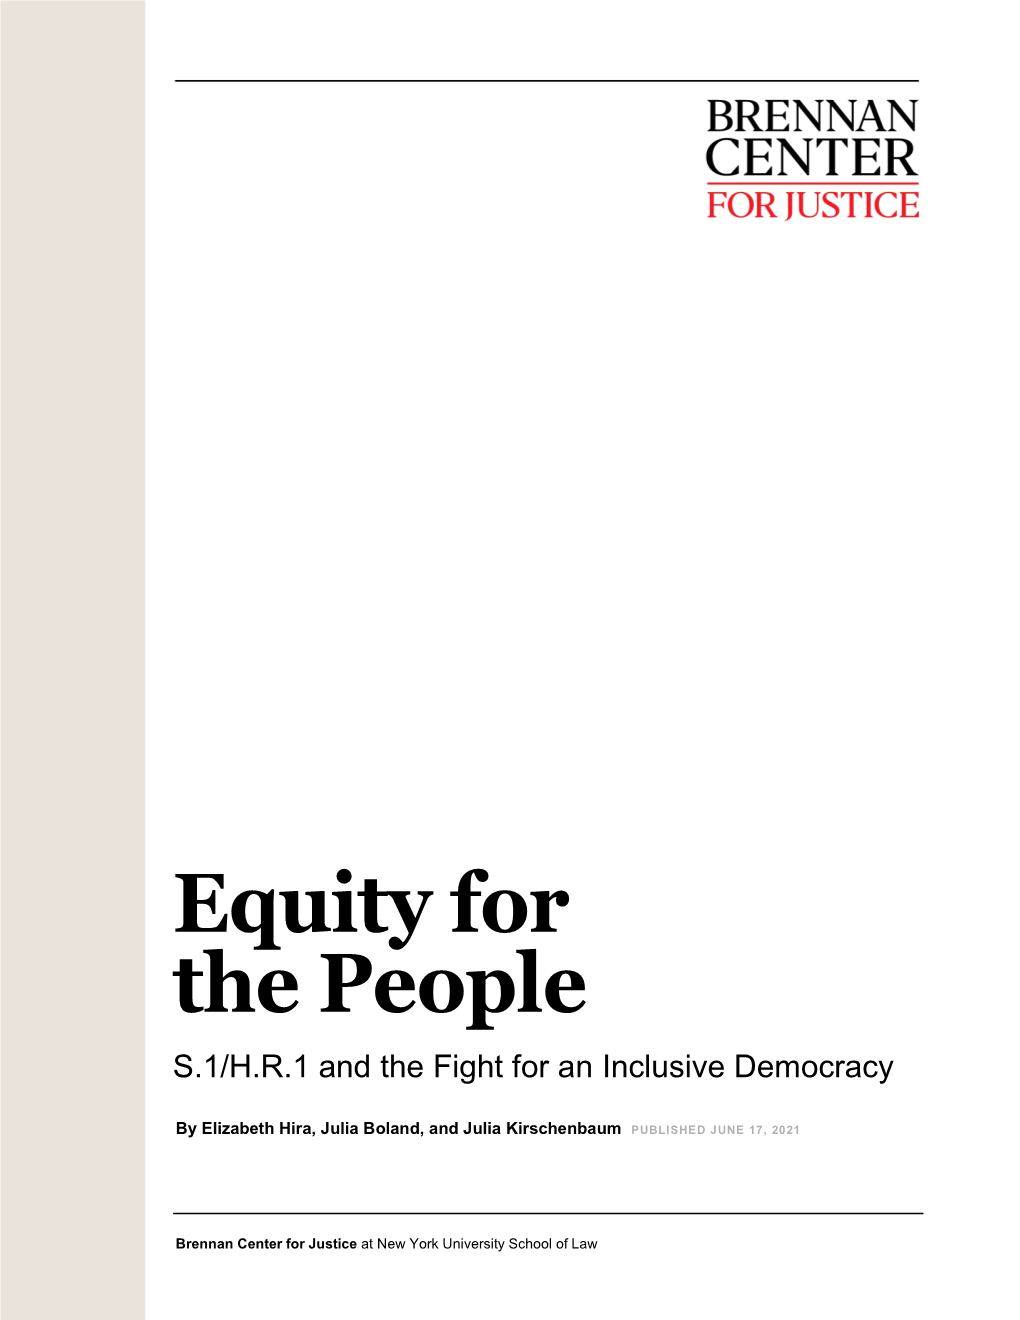 Equity for the People S.1/H.R.1 and the Fight for an Inclusive Democracy